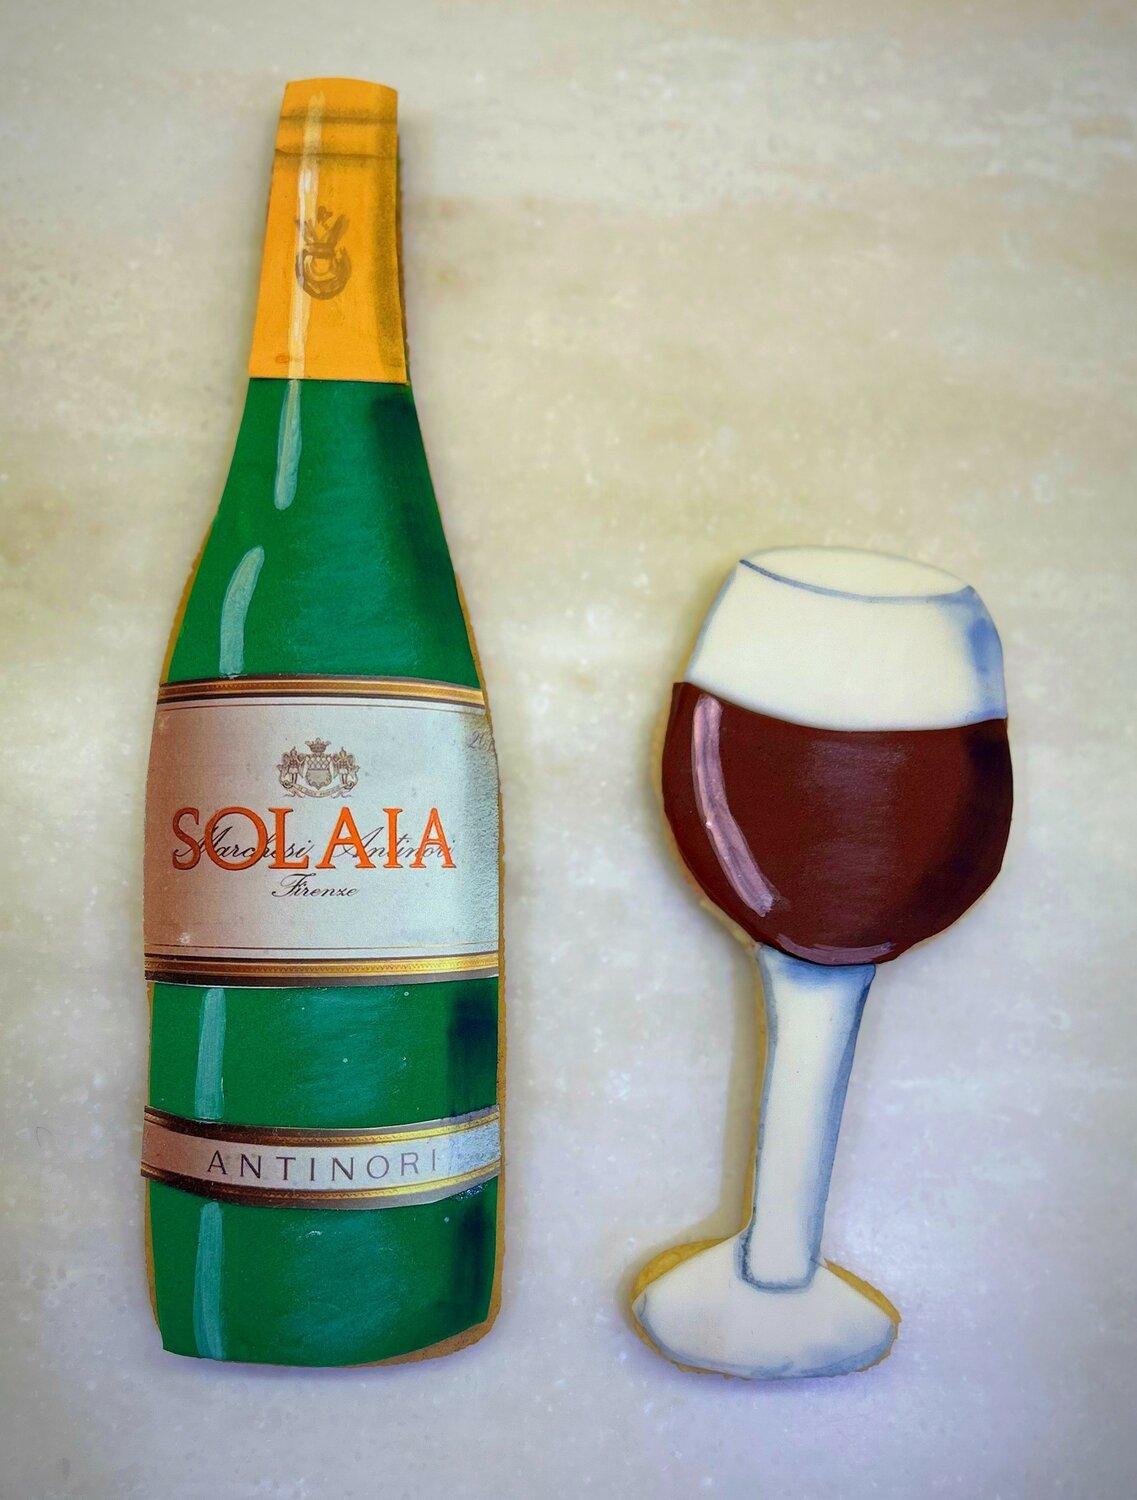 The Solaia bottle and glass cookies